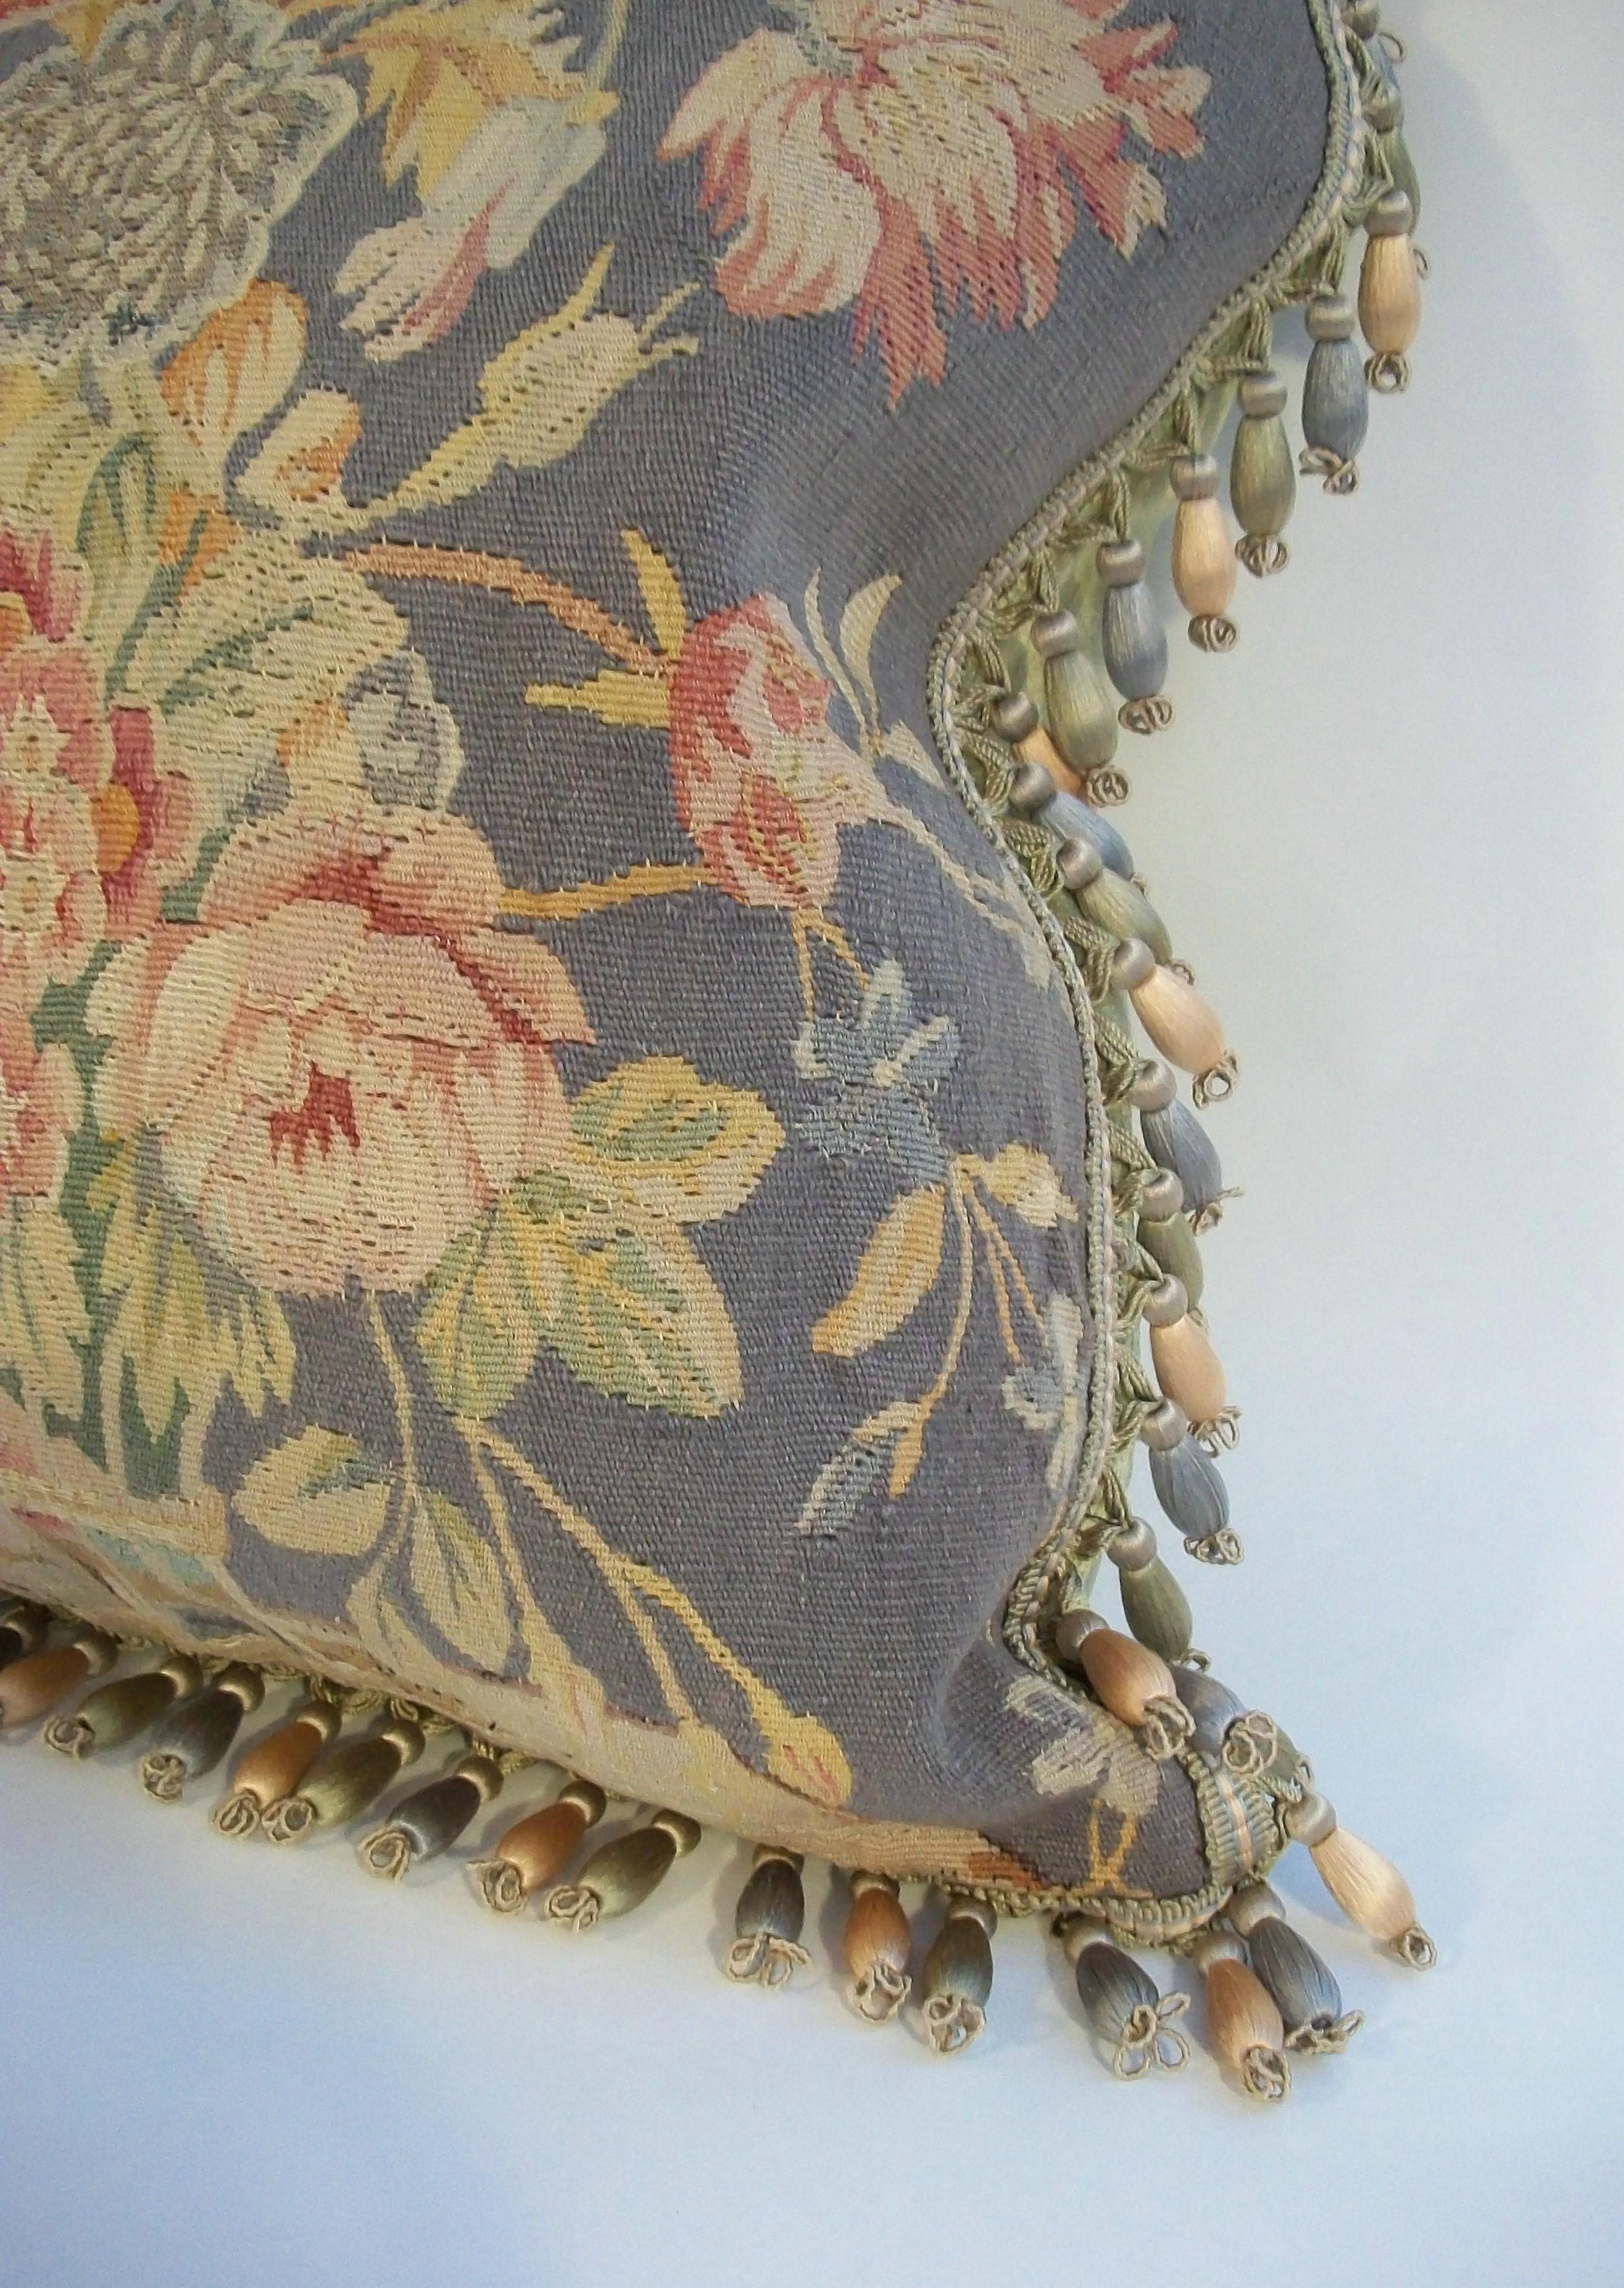 Antique Pair of Aubusson Tapestry Pillows - Wool & Silk - France - Circa 1820 For Sale 7